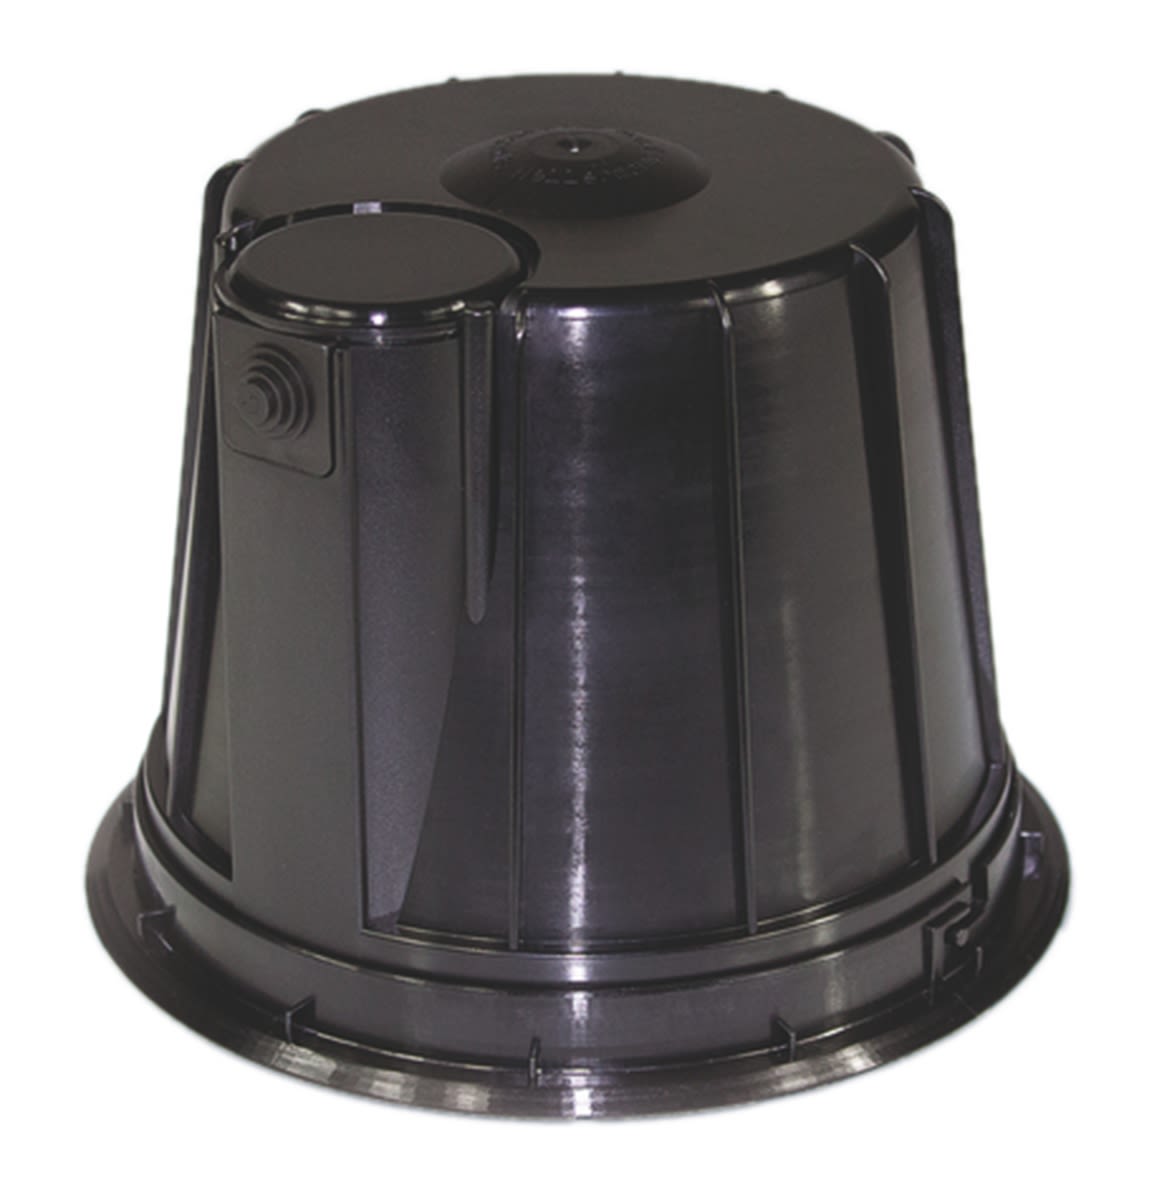 Lighting Cover for use with Reel and blowed-in insulations with LED and Compact Fluorescent Lamps, 184mm Width,140mm